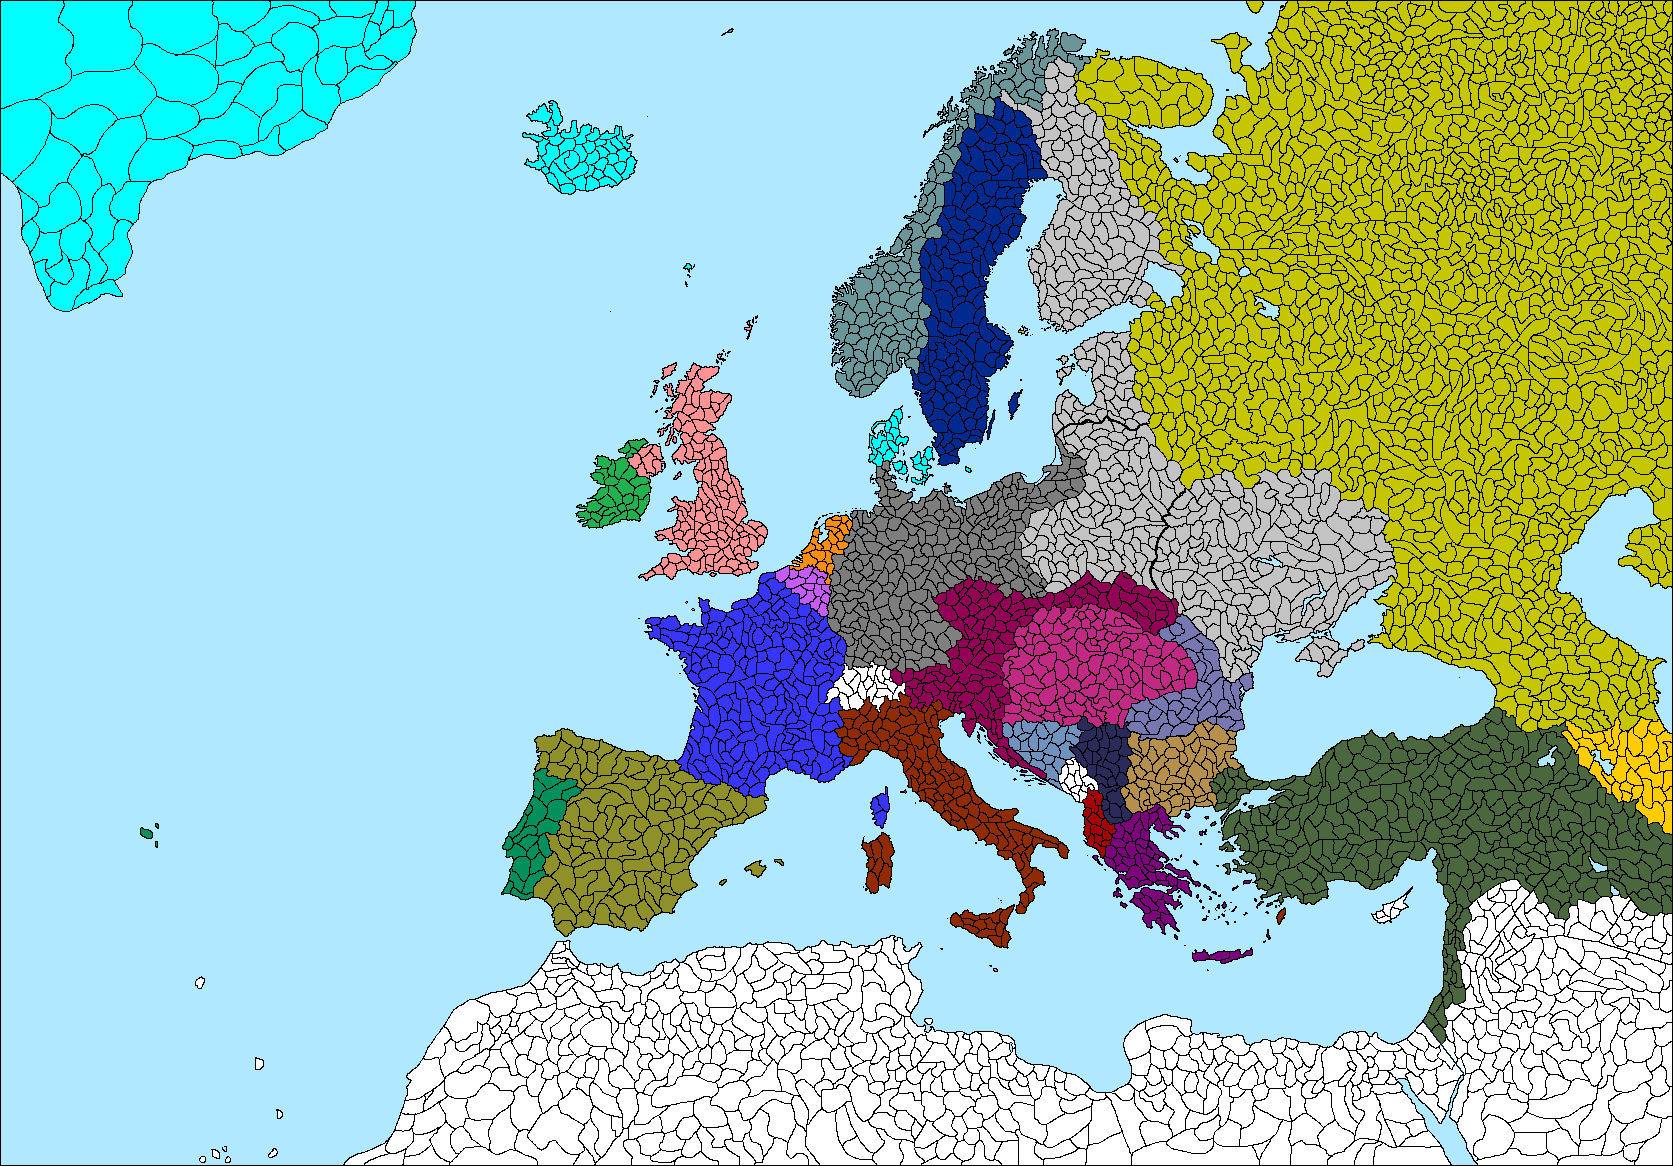 Alternate Butterfly Century Europe Map 1925.png